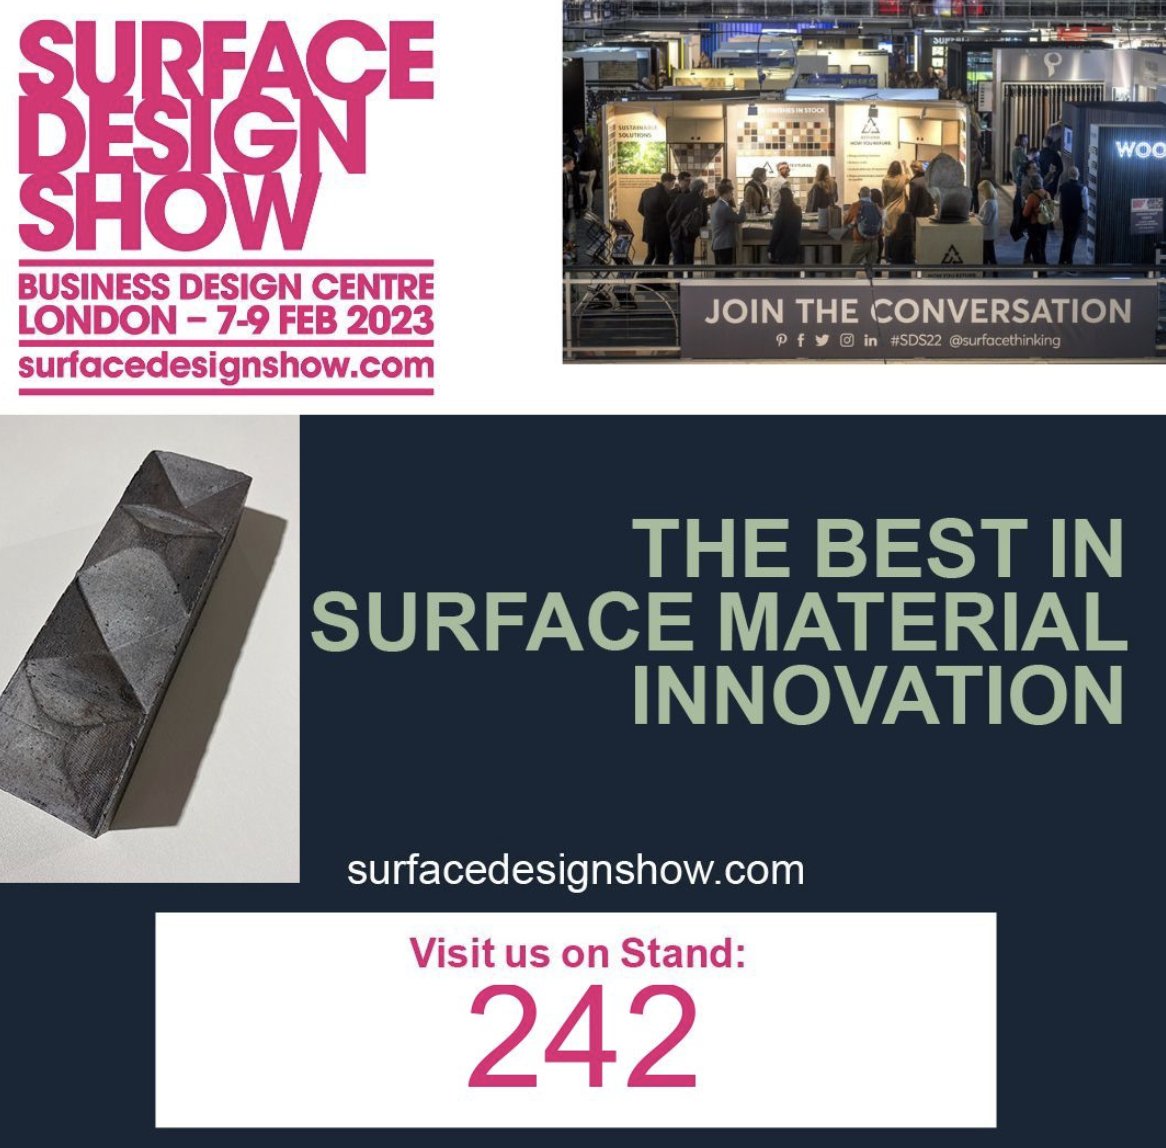 We're at #SurfaceDesignShow at London's @TheBDC from today till Thursday.

Visit us on stand 242 to view our range of clay #bricks, #brickslips, #quarrytiles & #pavers, as well as some exciting brick innovations! 

@surfacethinking  #surfacedesign #SDS #interiordesign @BricksUK